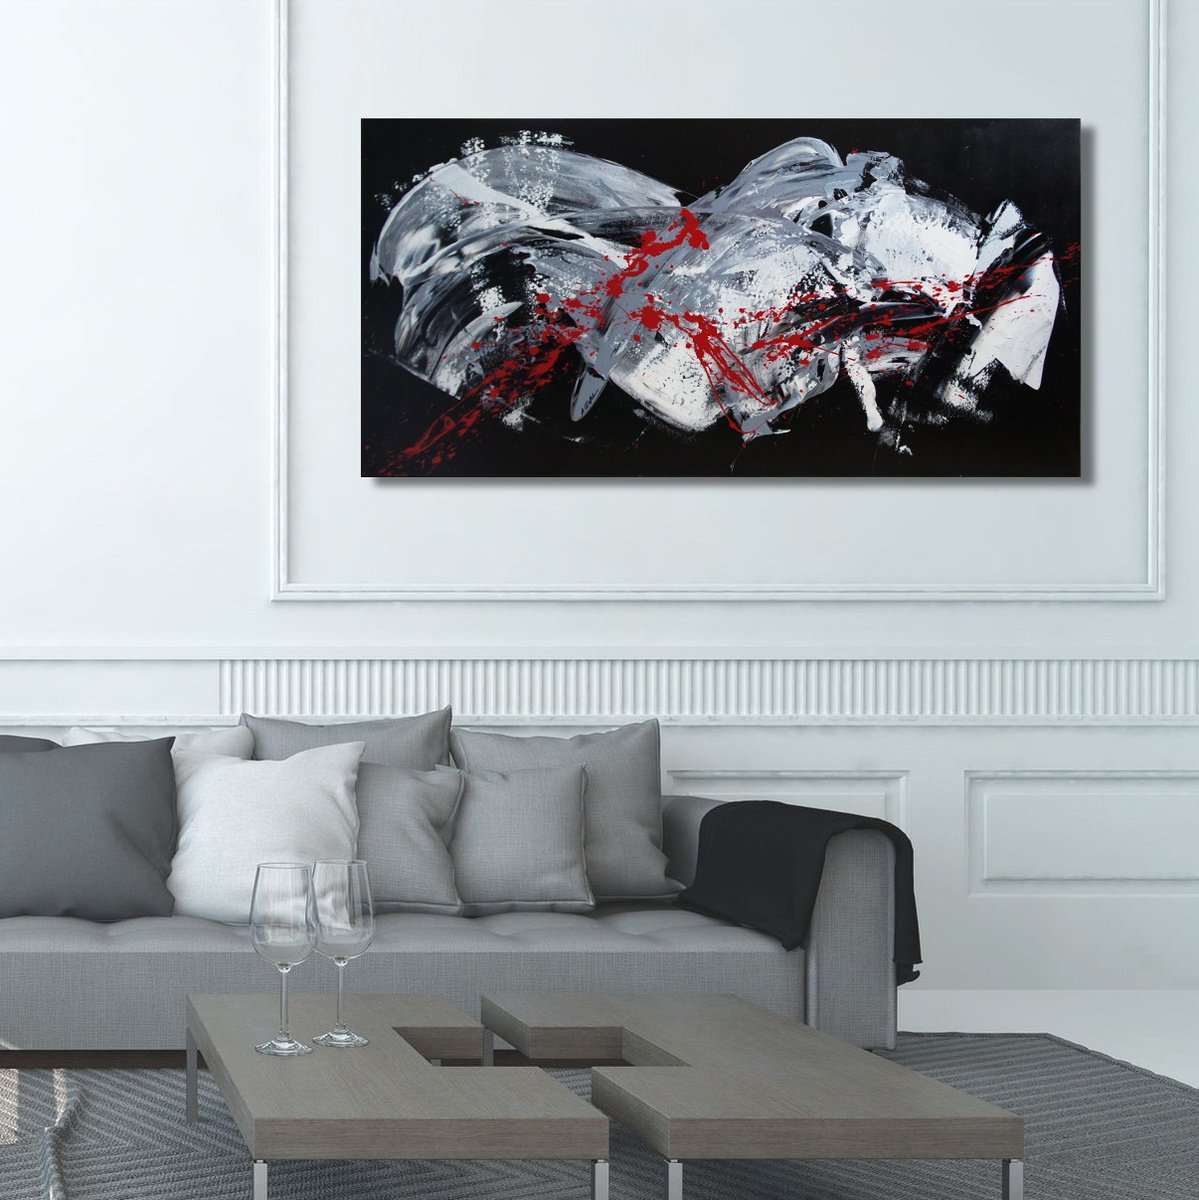 The Fast And The Furious And The Dead (140 x 70 cm) XXL (56 x 28 inches) by Ansgar Dressler